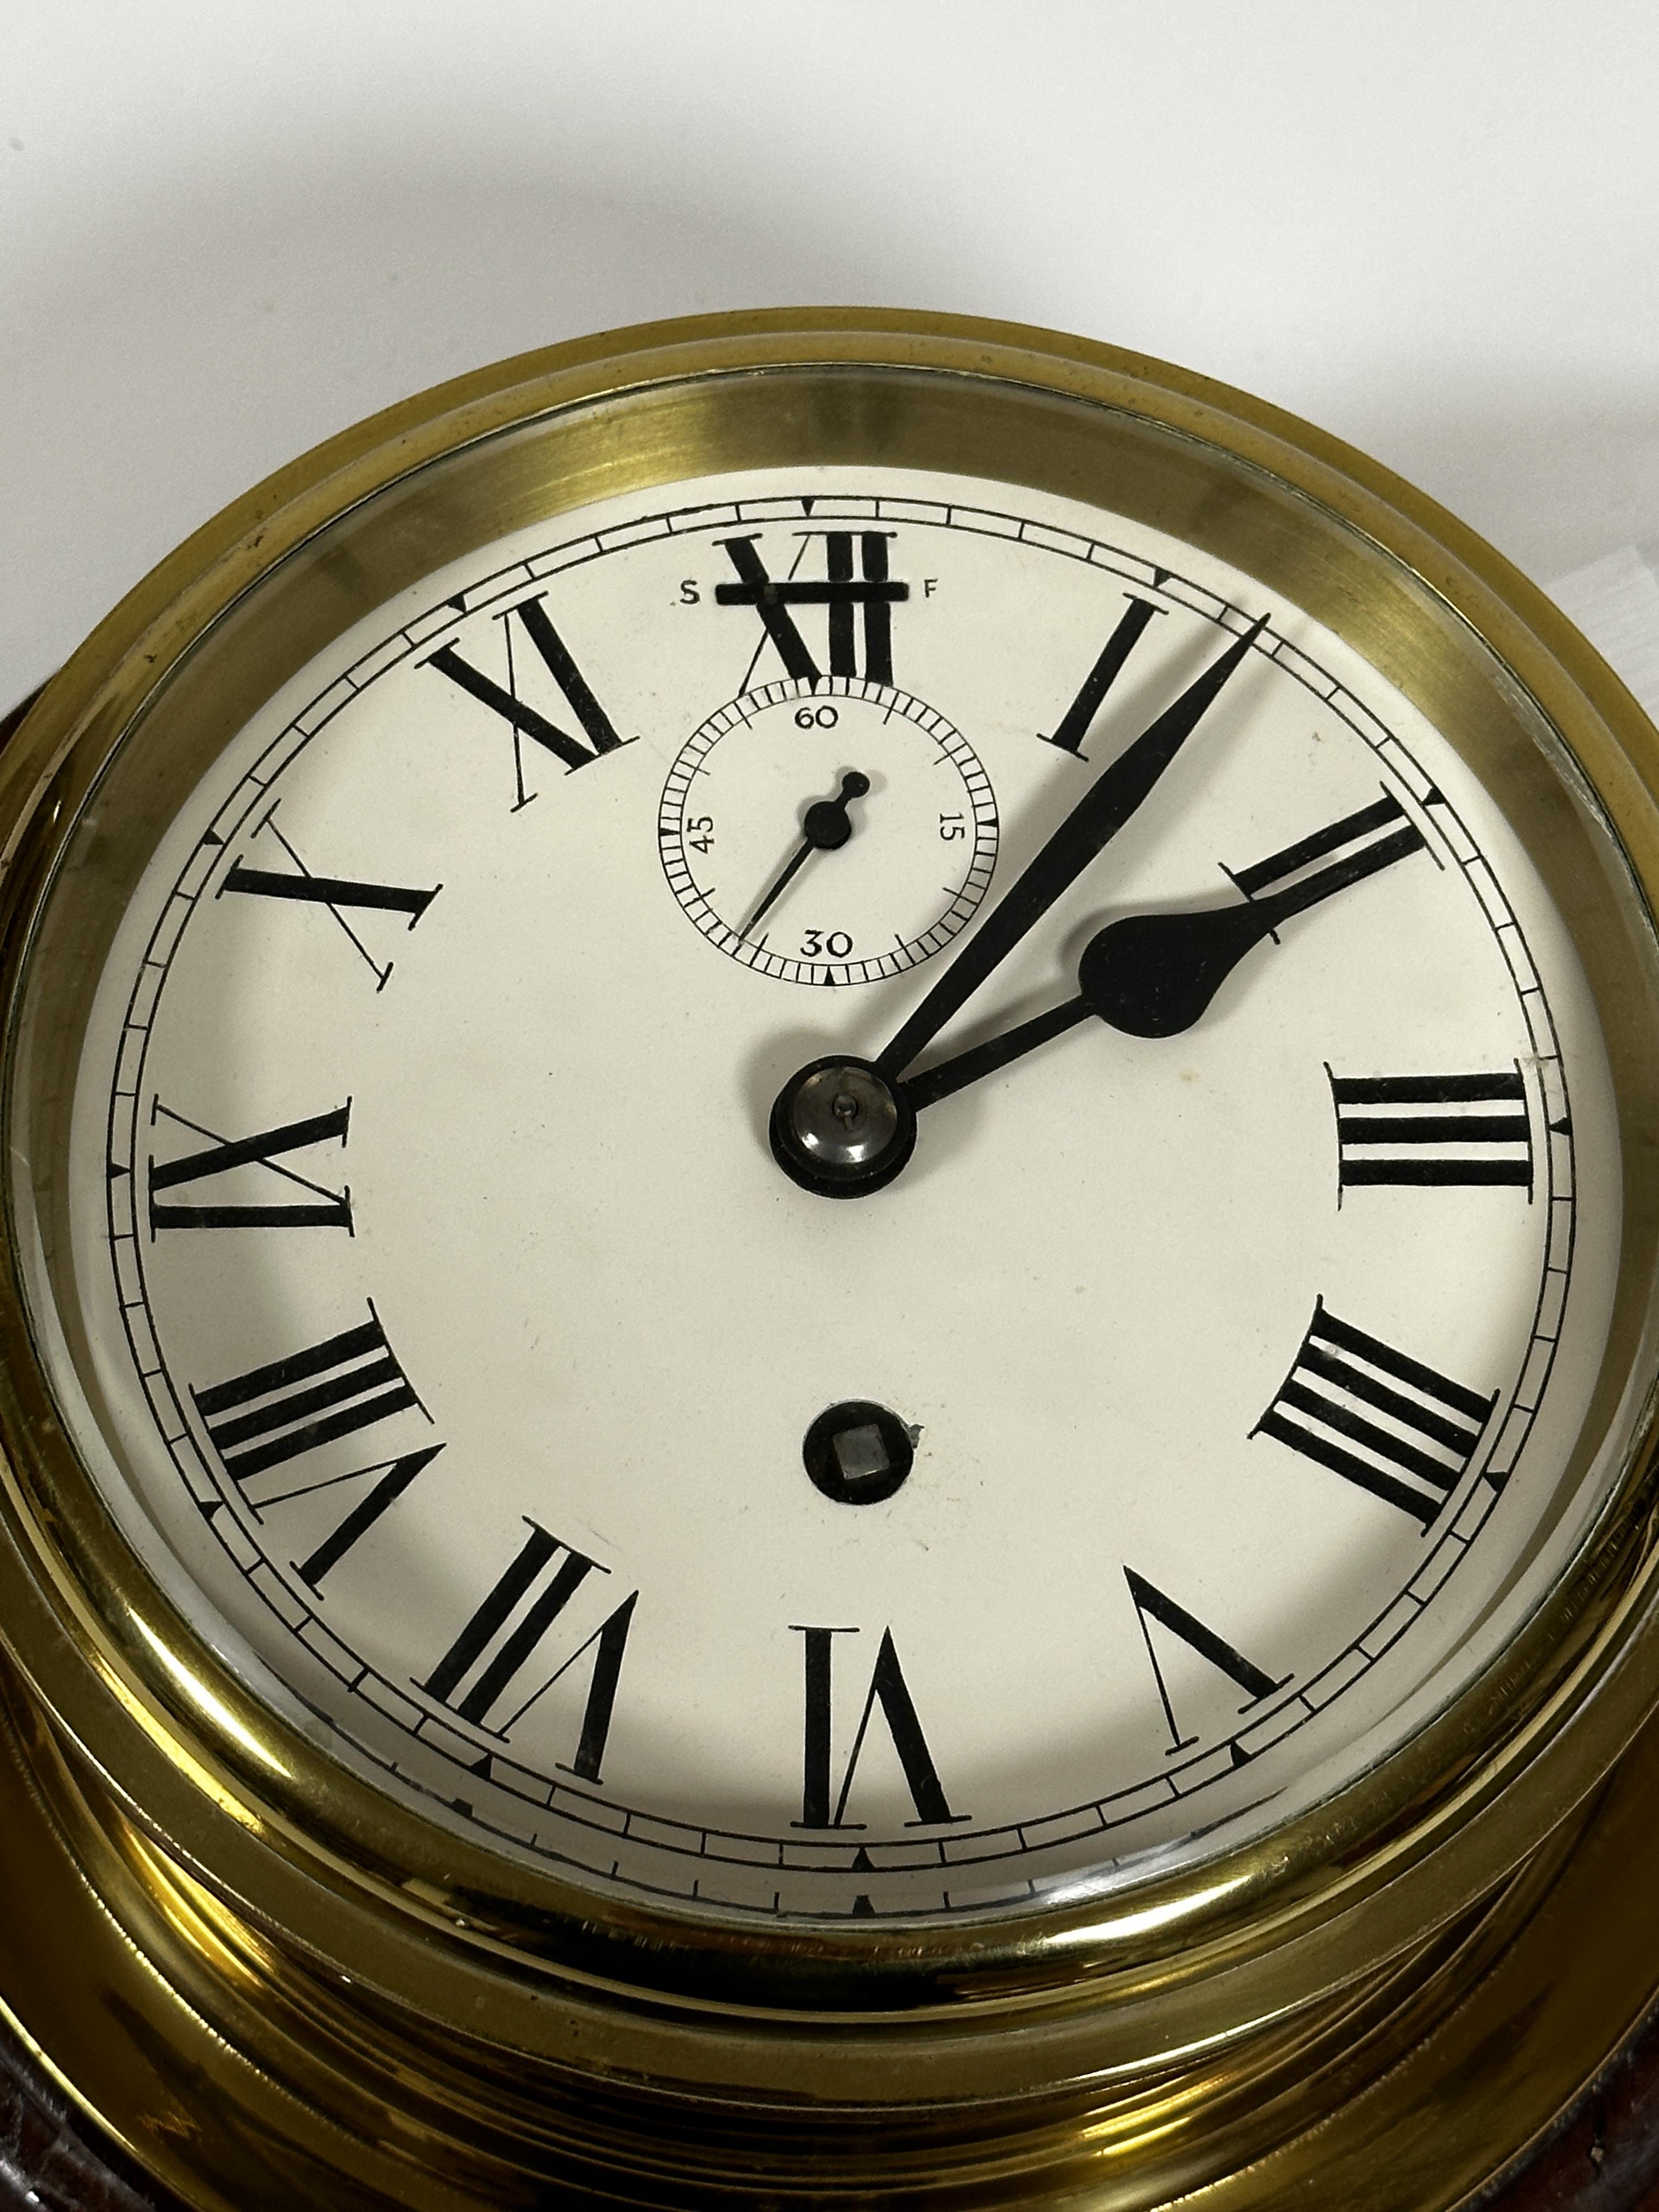 An Edwardian style brass ships wall clock with enamel dial and subsidiaries dial, complete with - Image 2 of 2